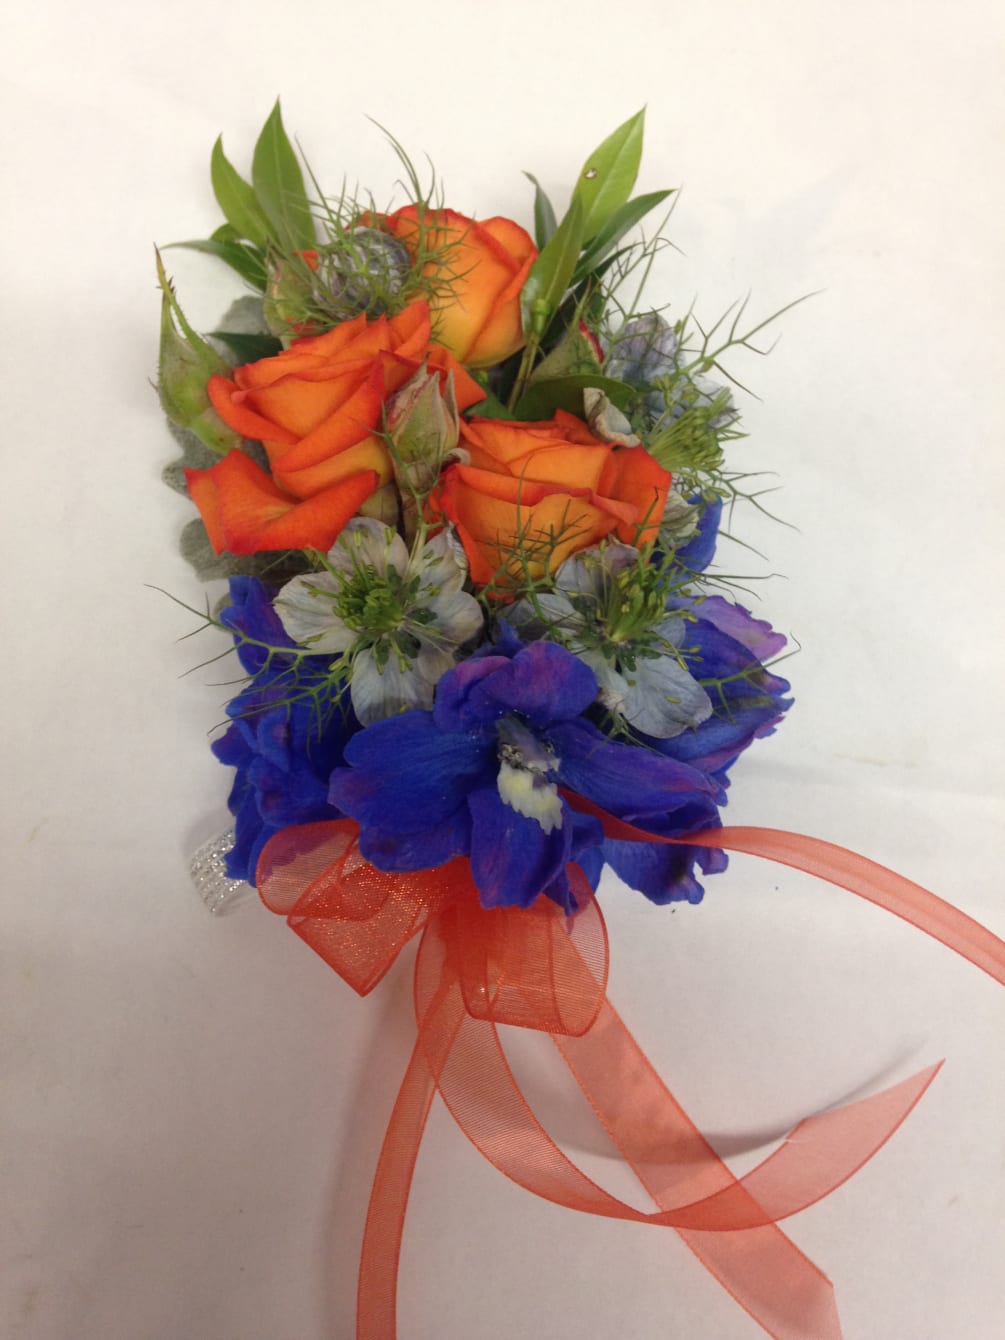 A bold, contrasting orange and blue wrist corsage for prom or a